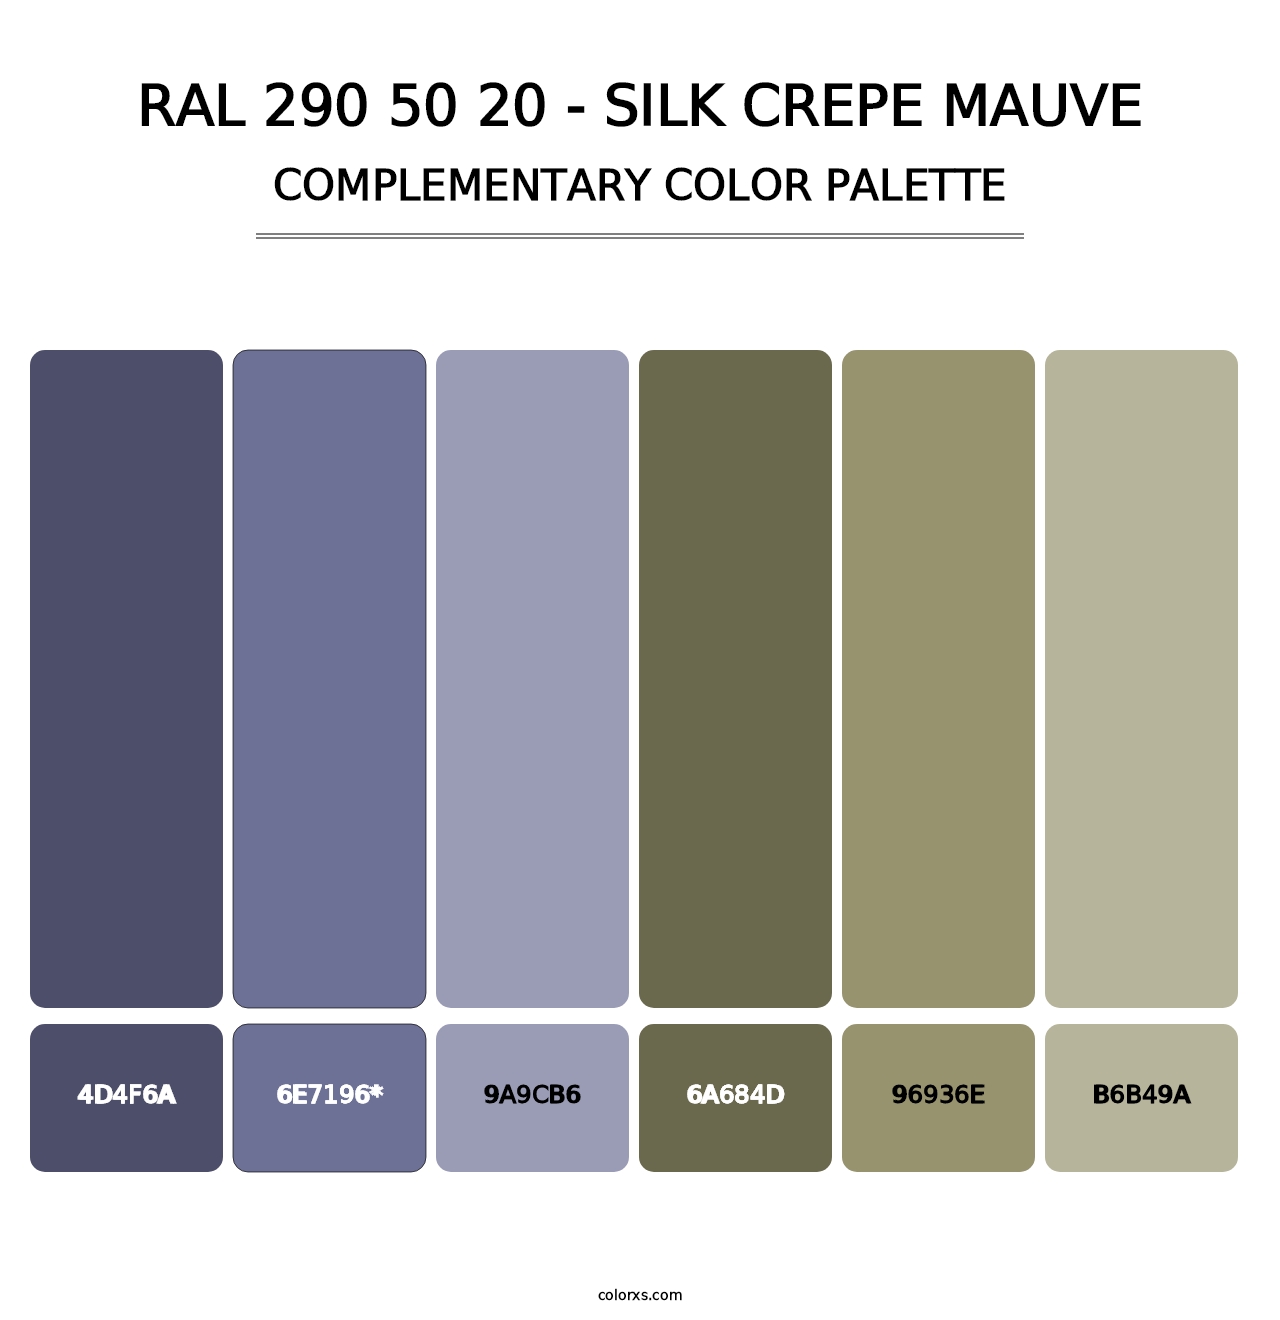 RAL 290 50 20 - Silk Crepe Mauve - Complementary Color Palette